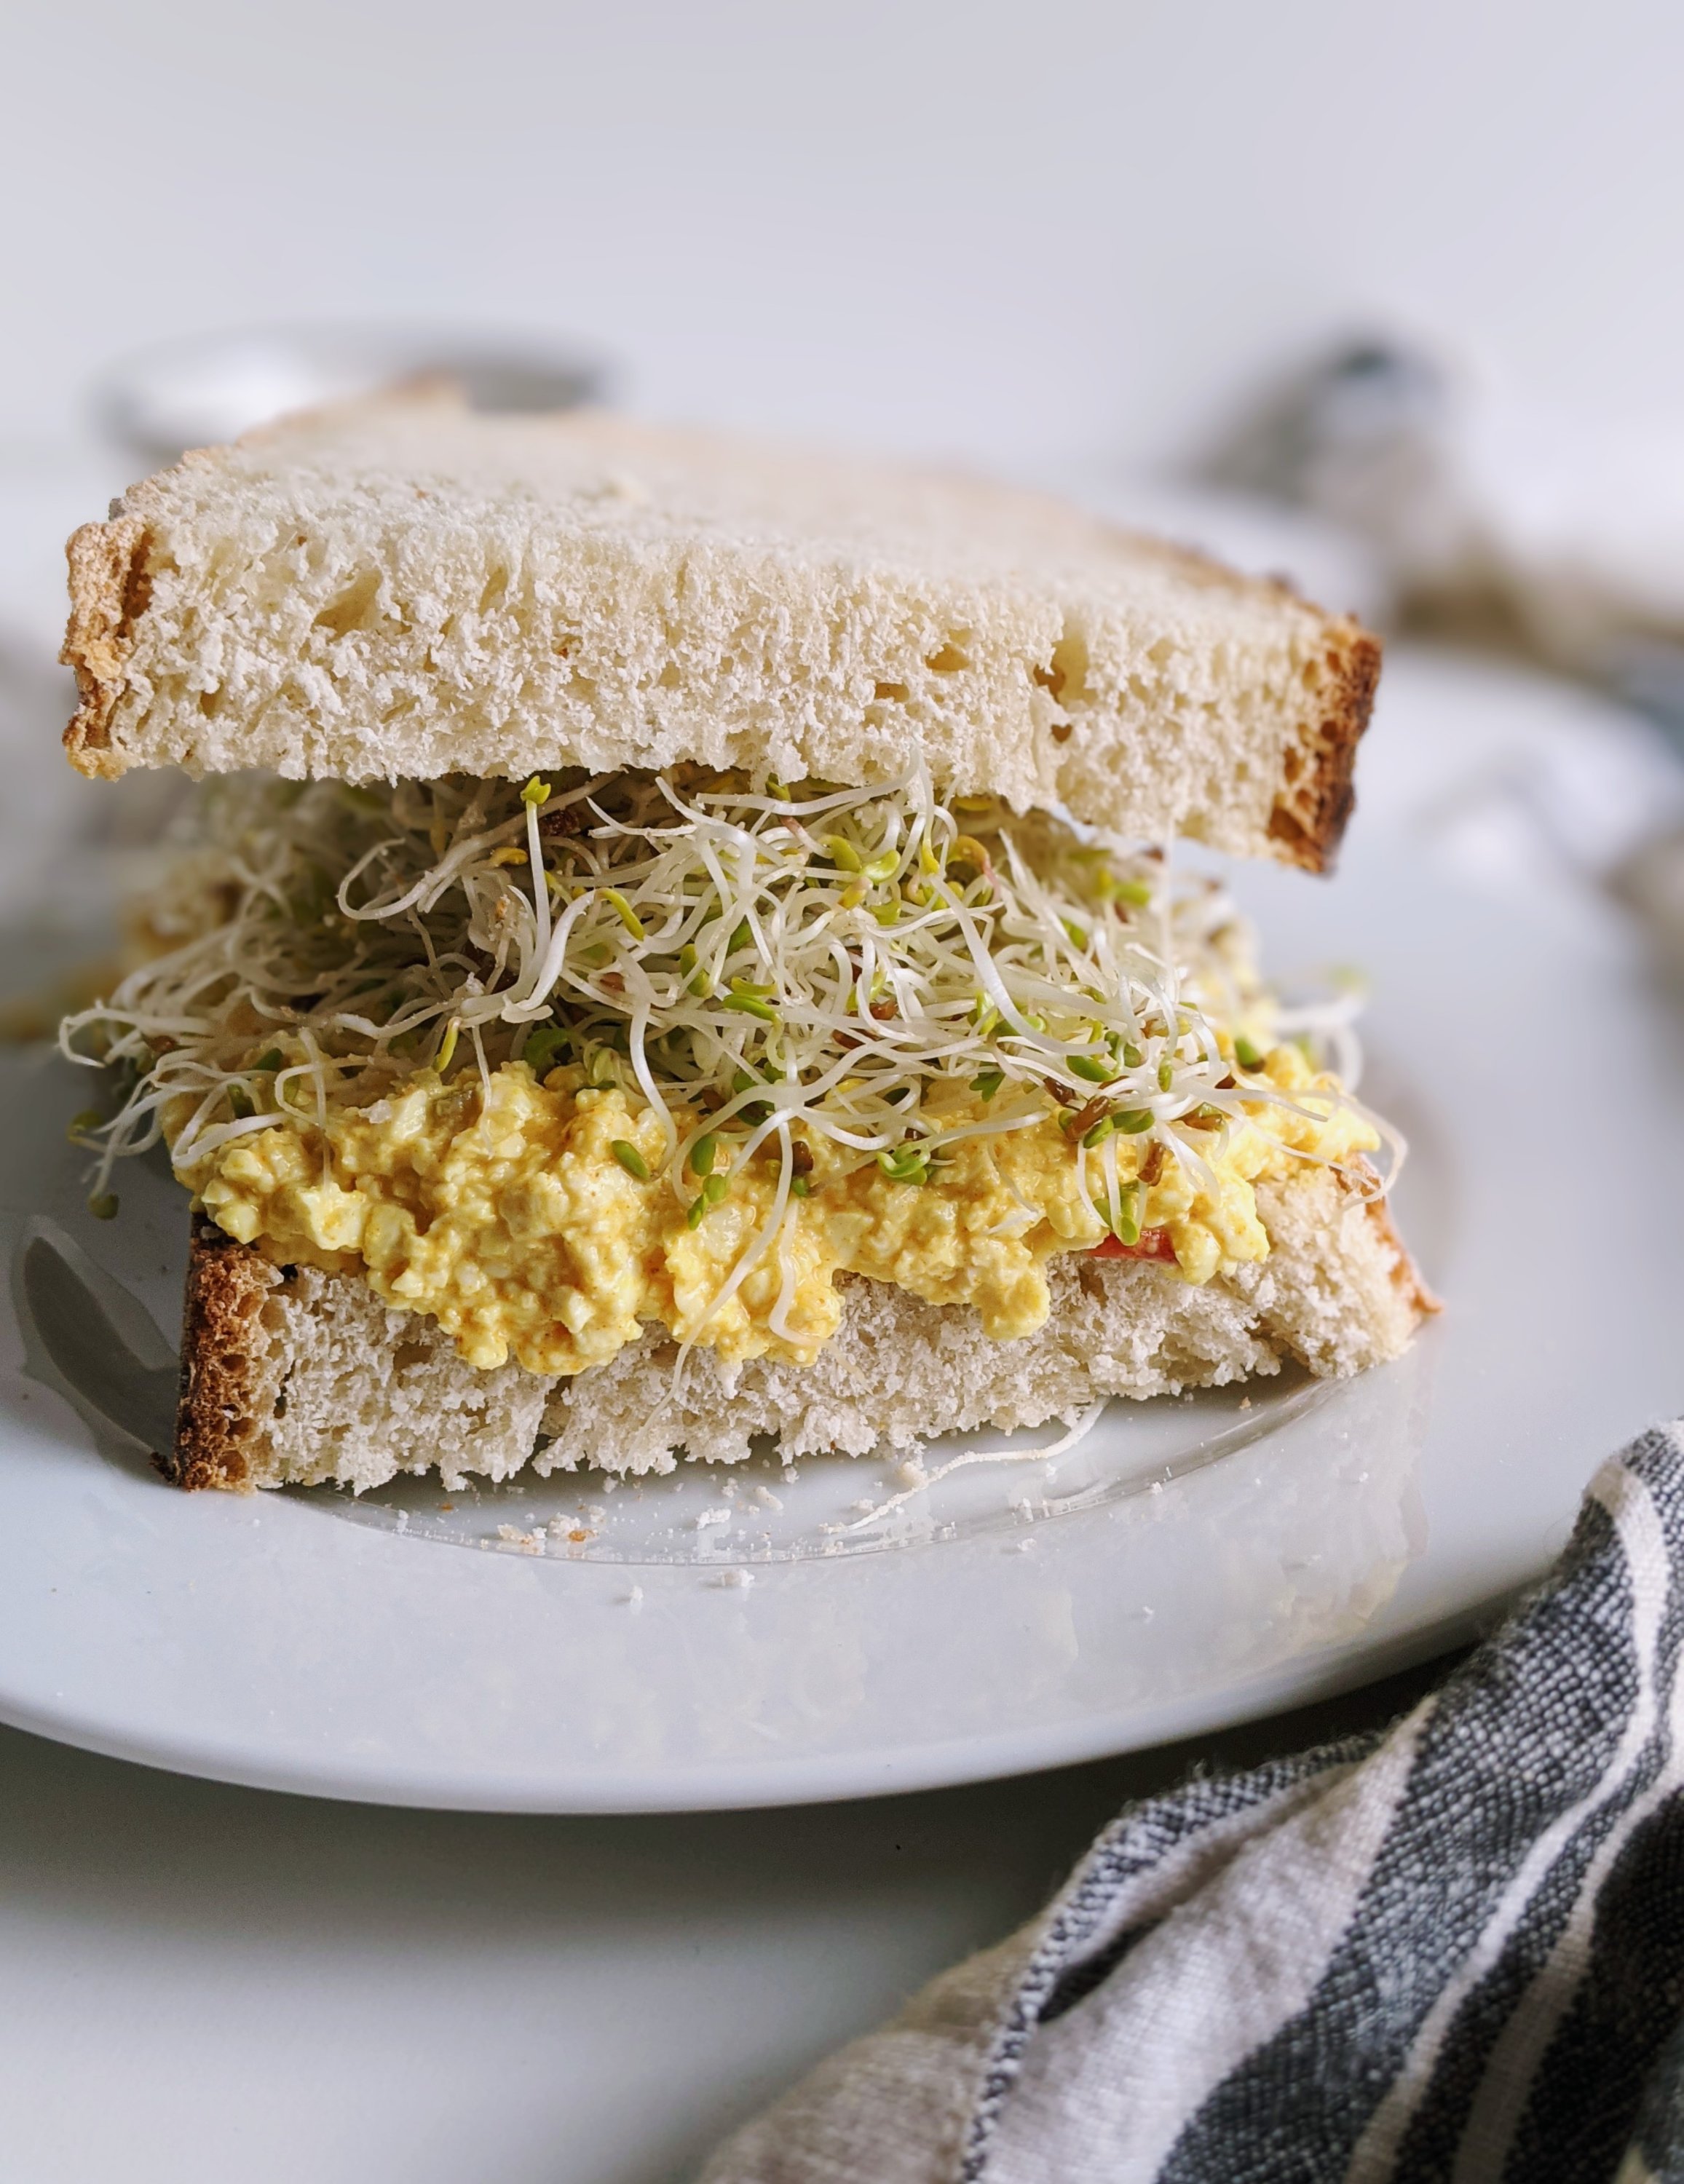 high protein vegan sandwich recipes with silken tofu shelf stable pantry ingredients healthy sprouts sandwiches for luc or dinner vegetarian gluten free